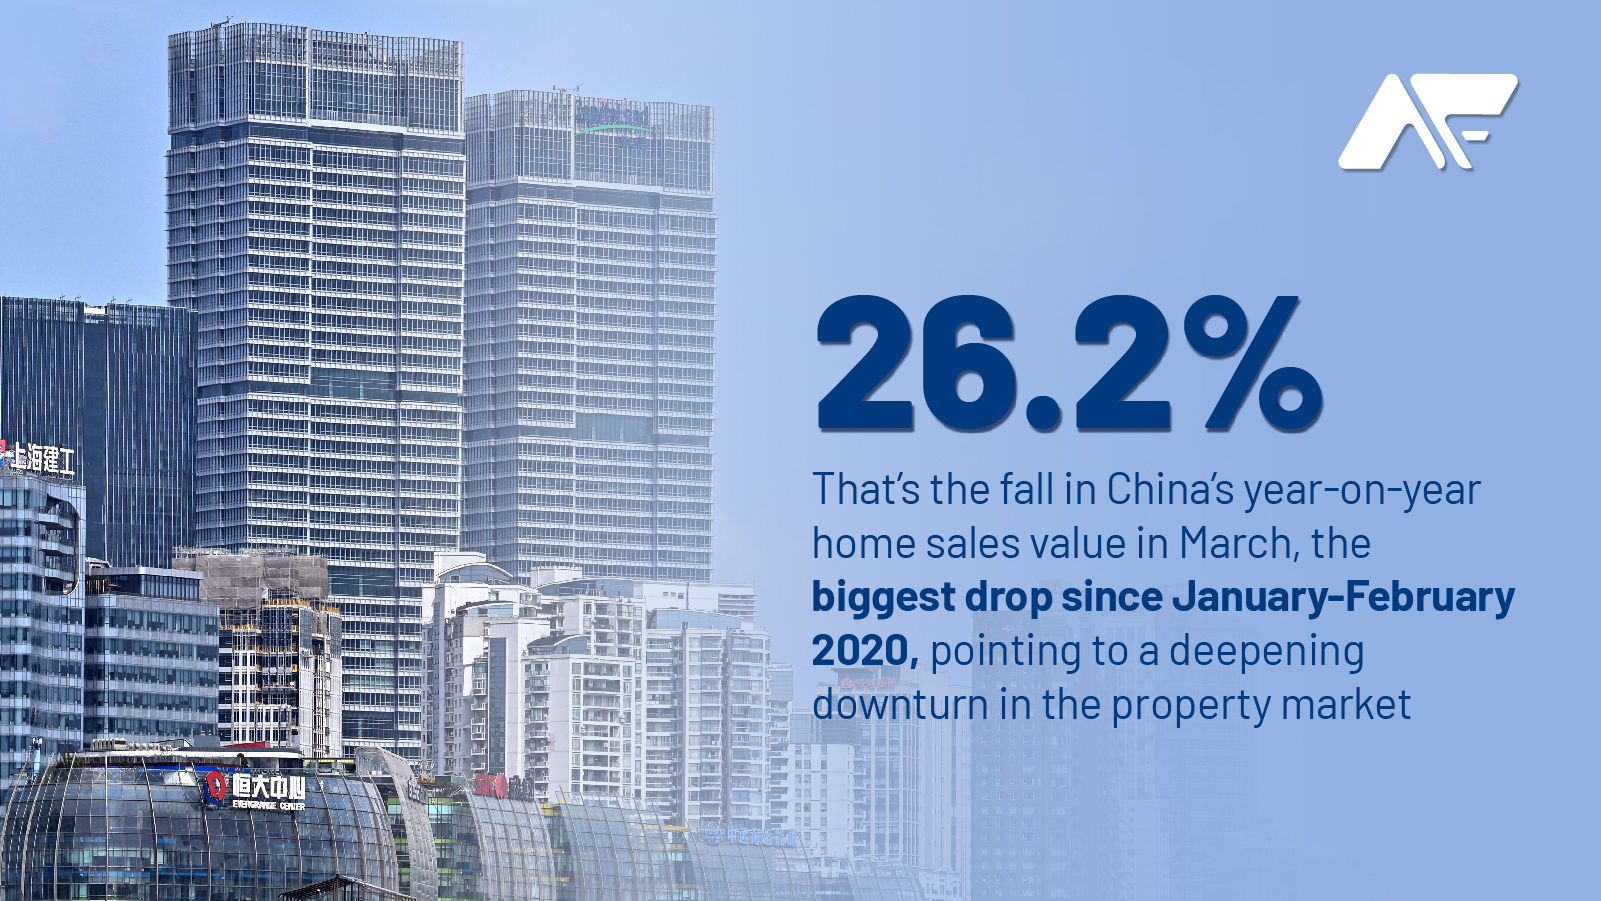 Graphic: The fall in China’s year-on-year home sales value in March 2022